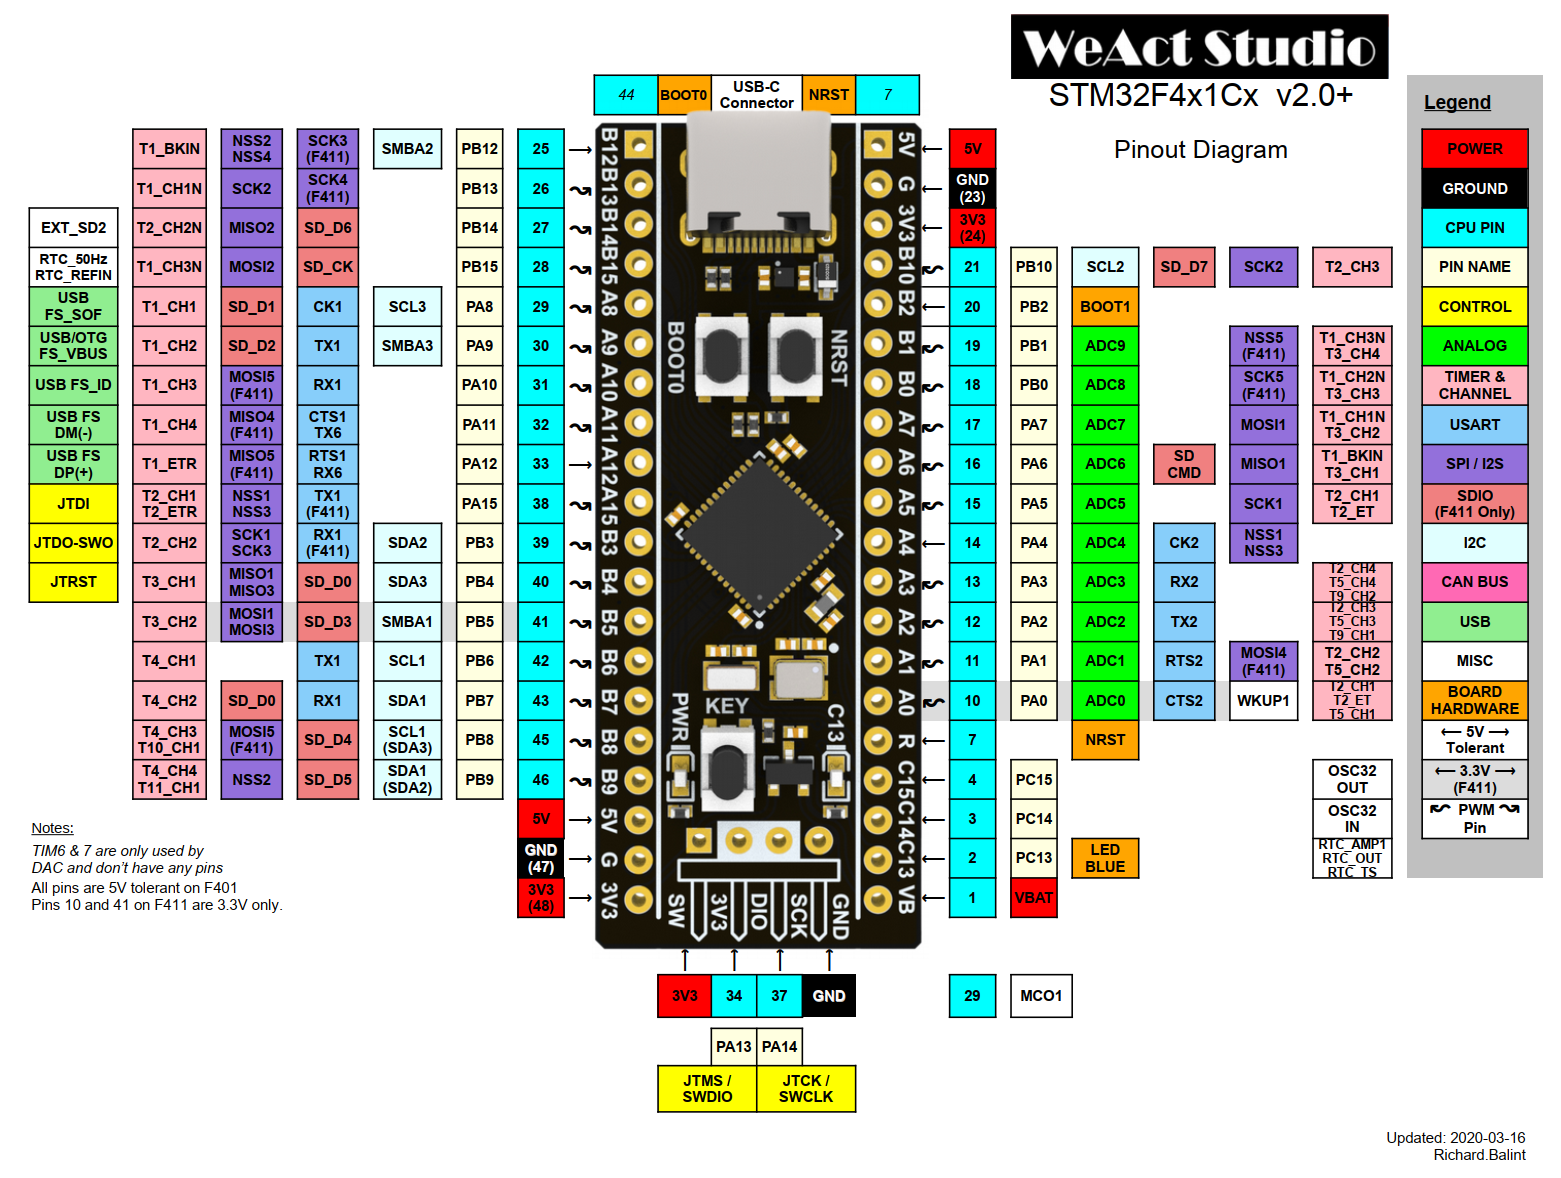  "/General document/STM32F4x1 v2.0+ Pin Layout"